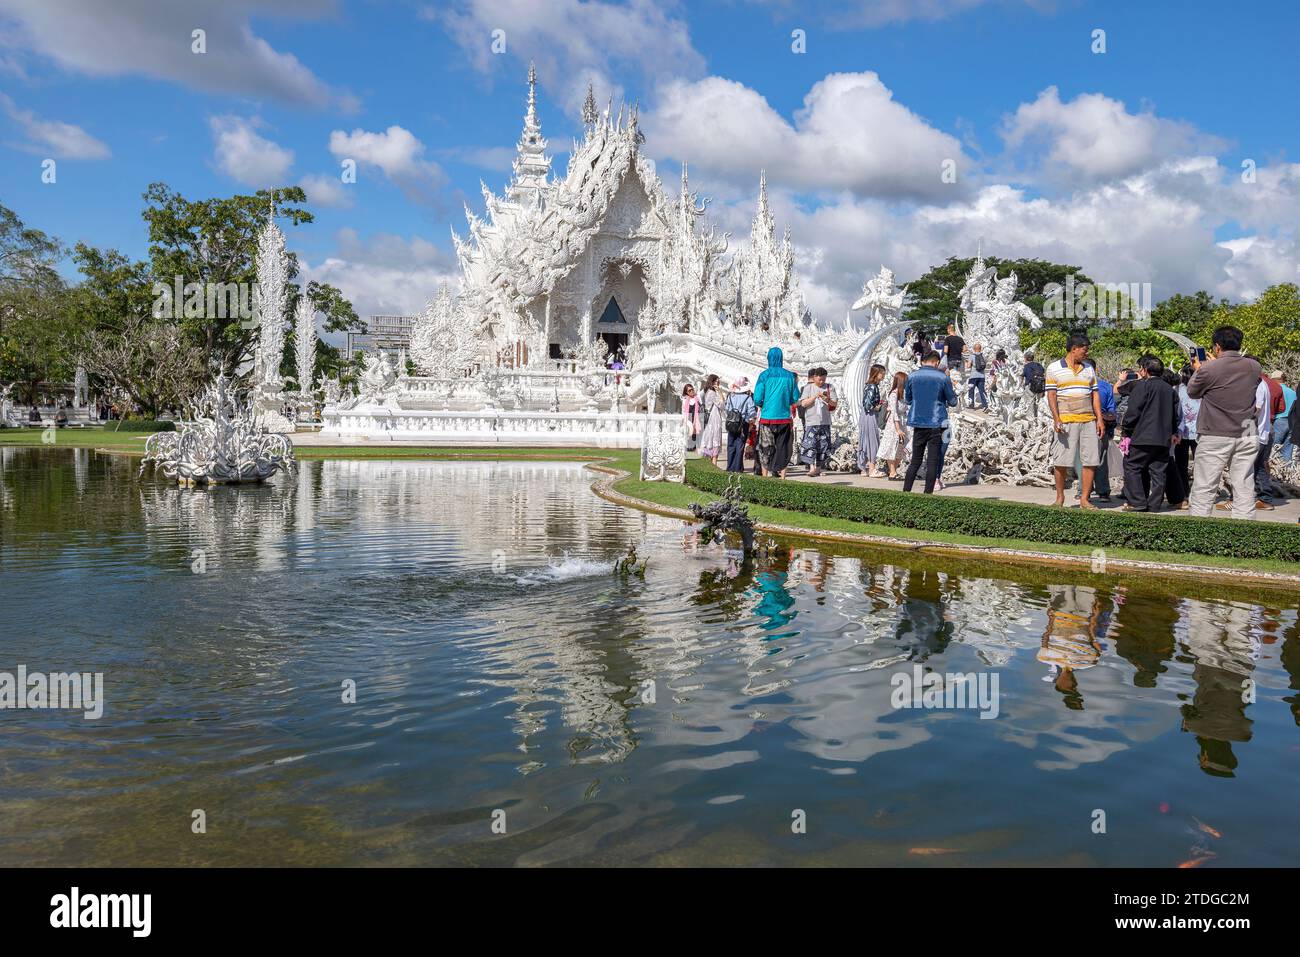 CHIANG RAI, THAILAND - DECEMBER 16, 2018: A group of tourists at the Wat Rong Khun Buddhist Temple (White Temple). Chiang Rai, Thailand Stock Photo